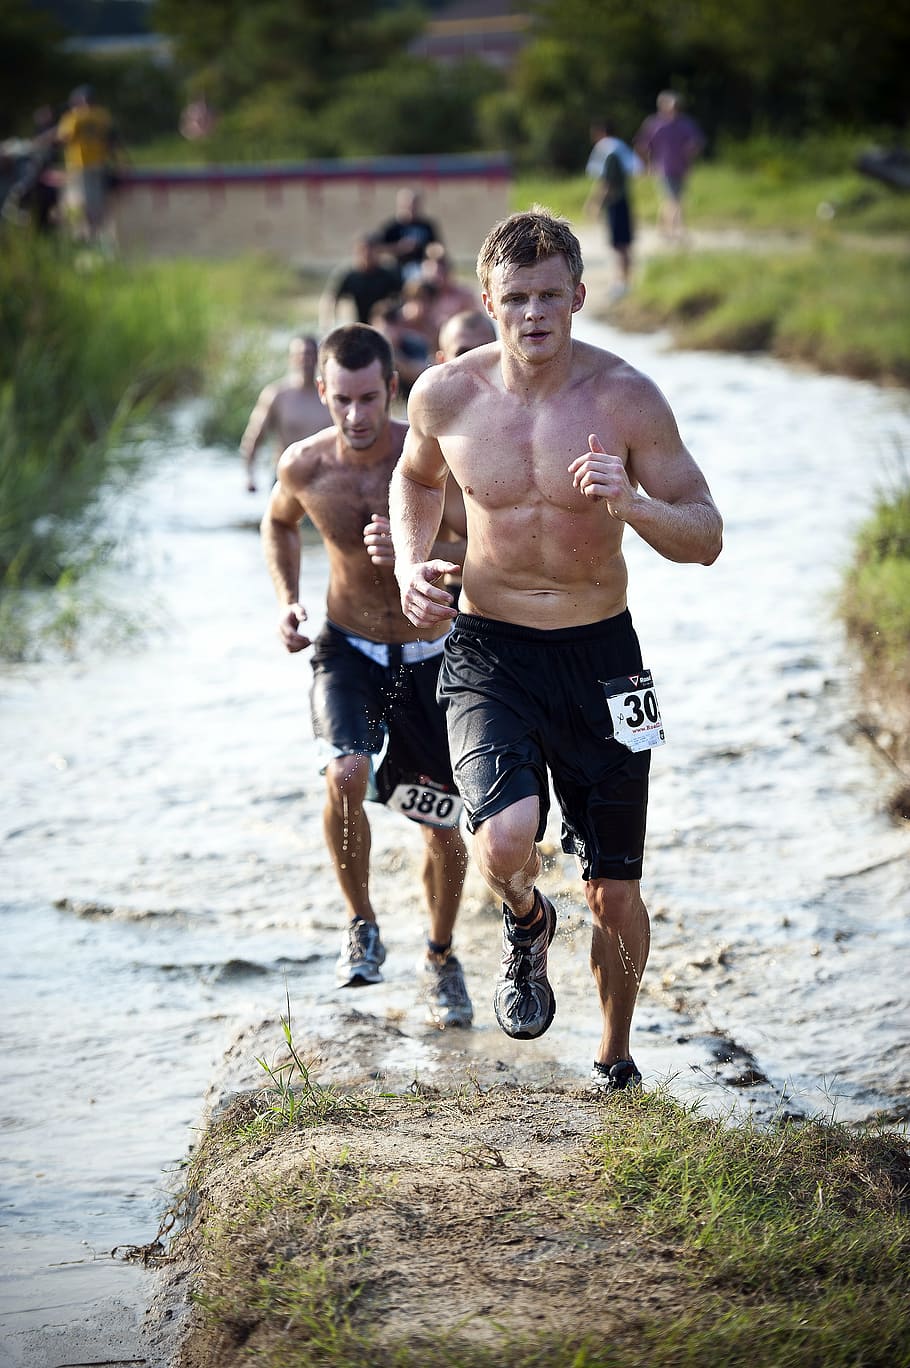 men, running, dayime, runners, competition, race, mud, obstacle, feet, water